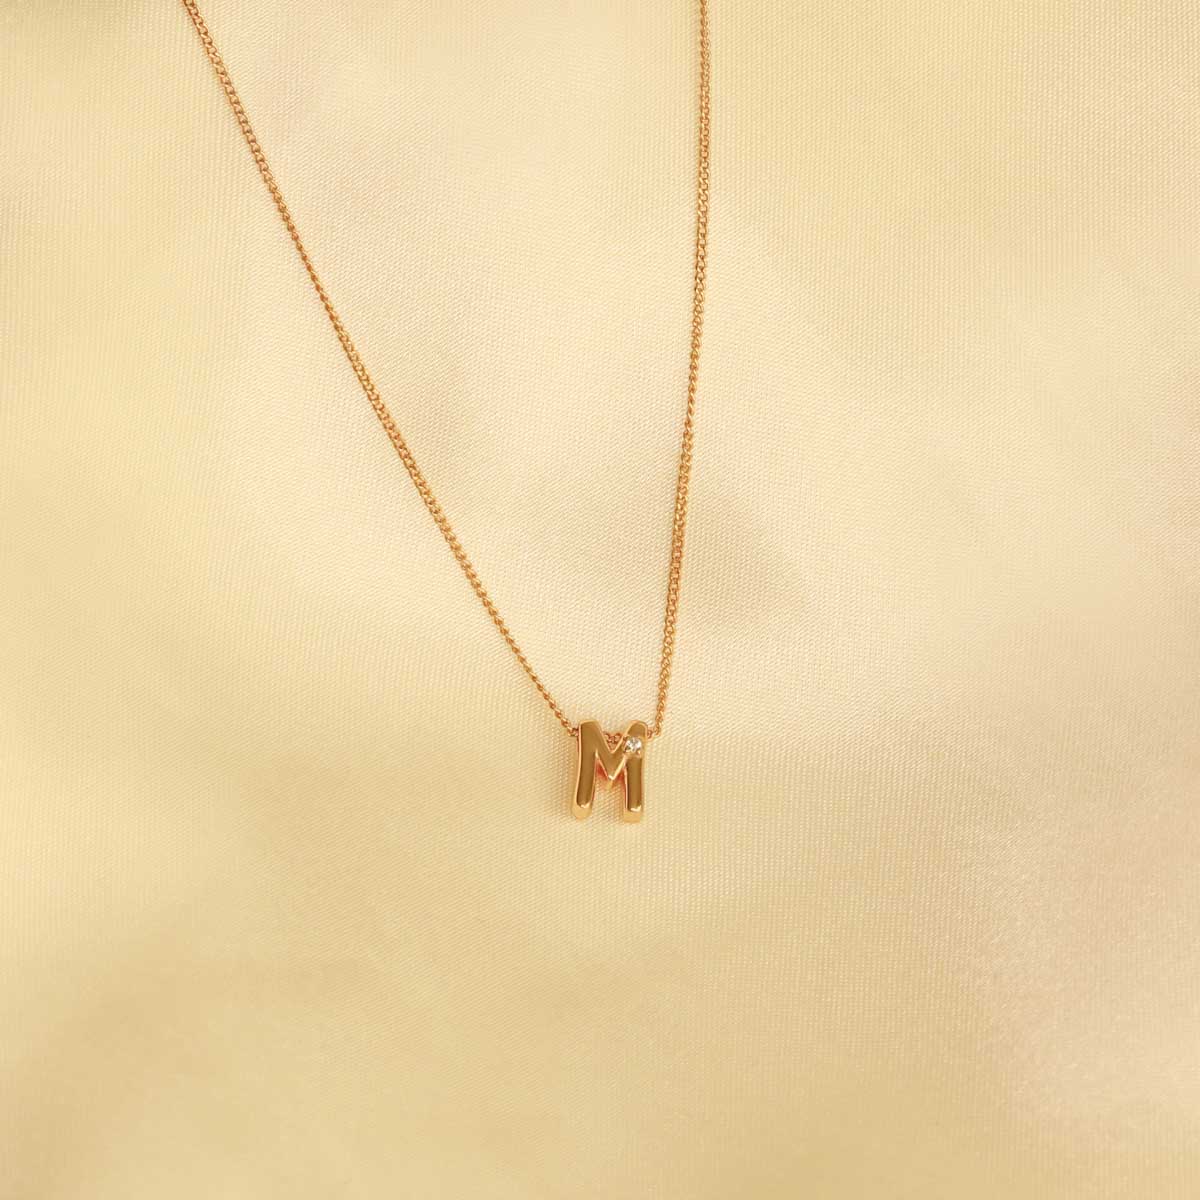 Flat lay shot of M Initial Pendant Necklace in Gold